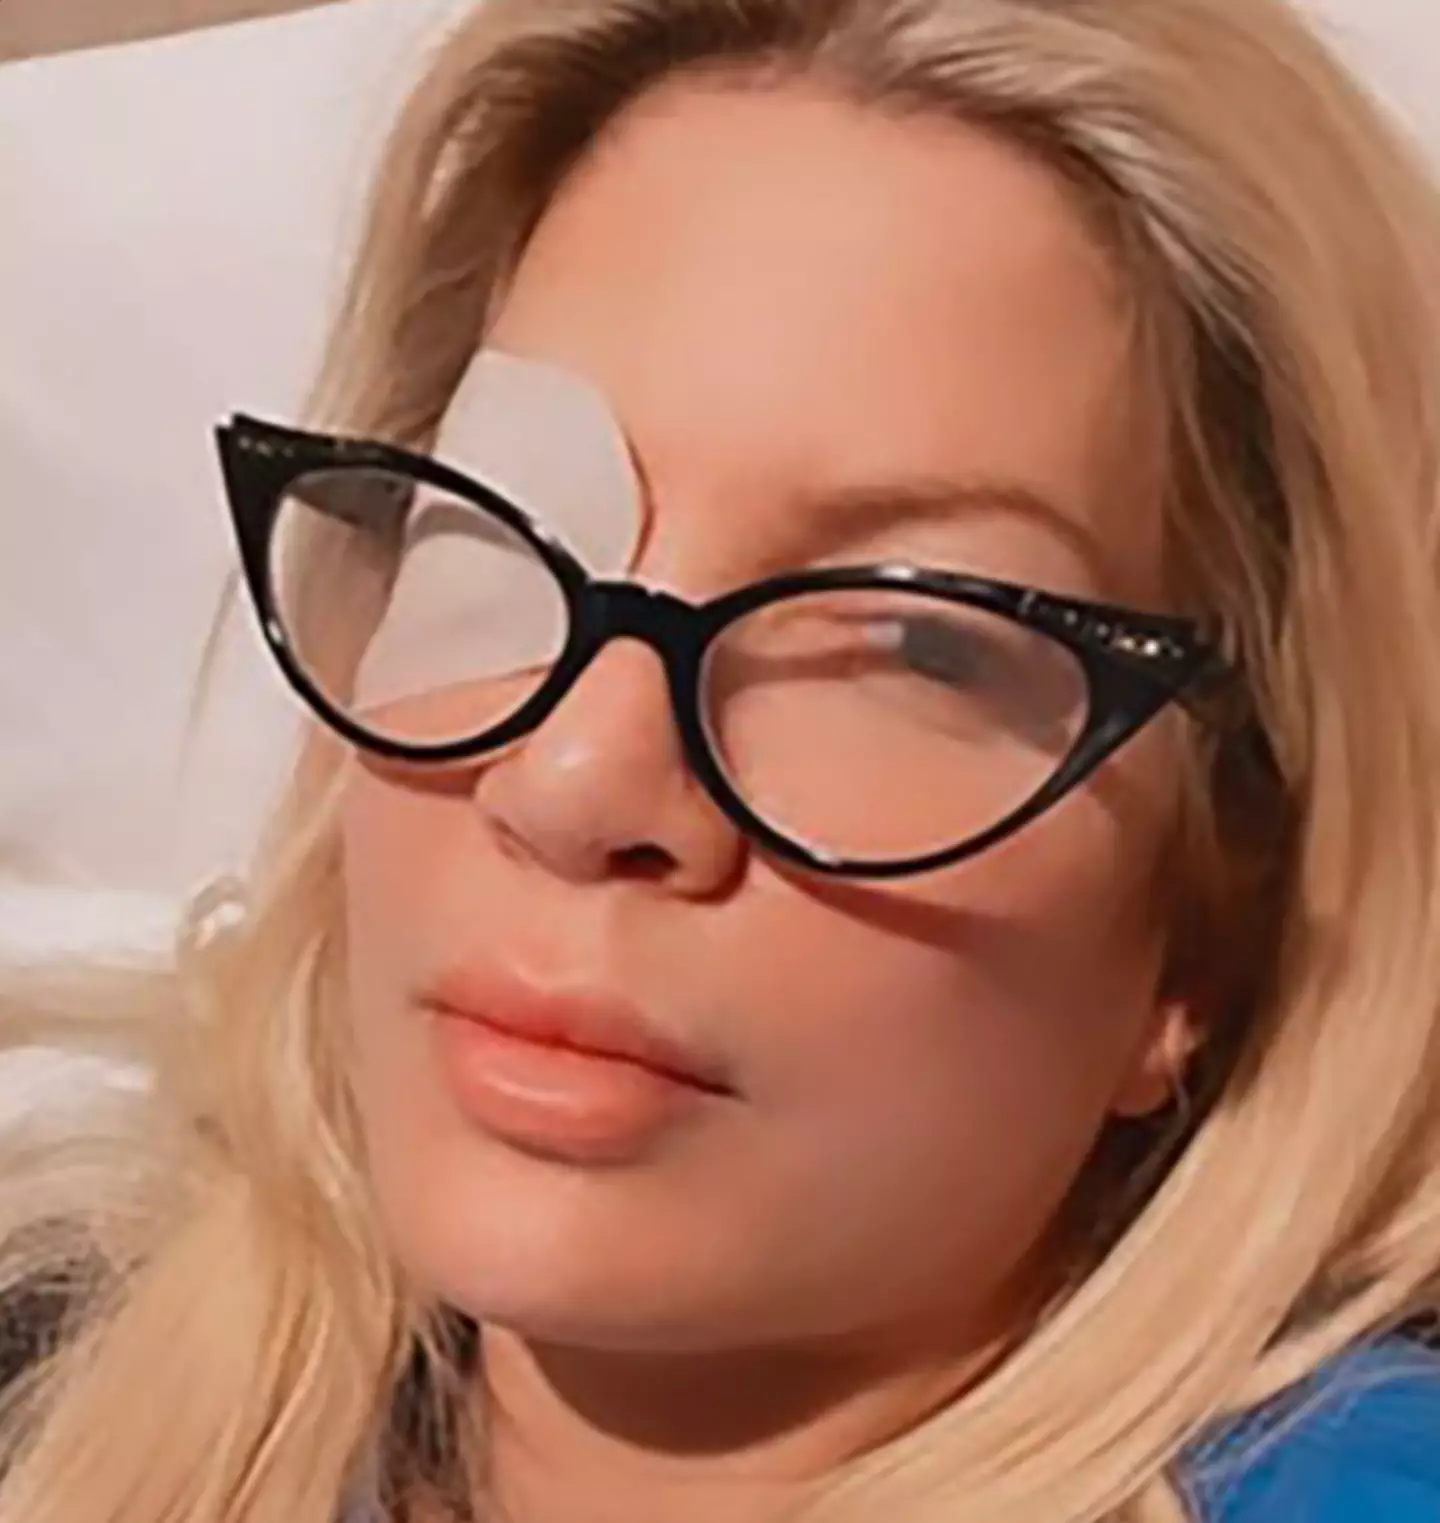 Tori Spelling has been wearing an eye patch since the ulcer appeared.